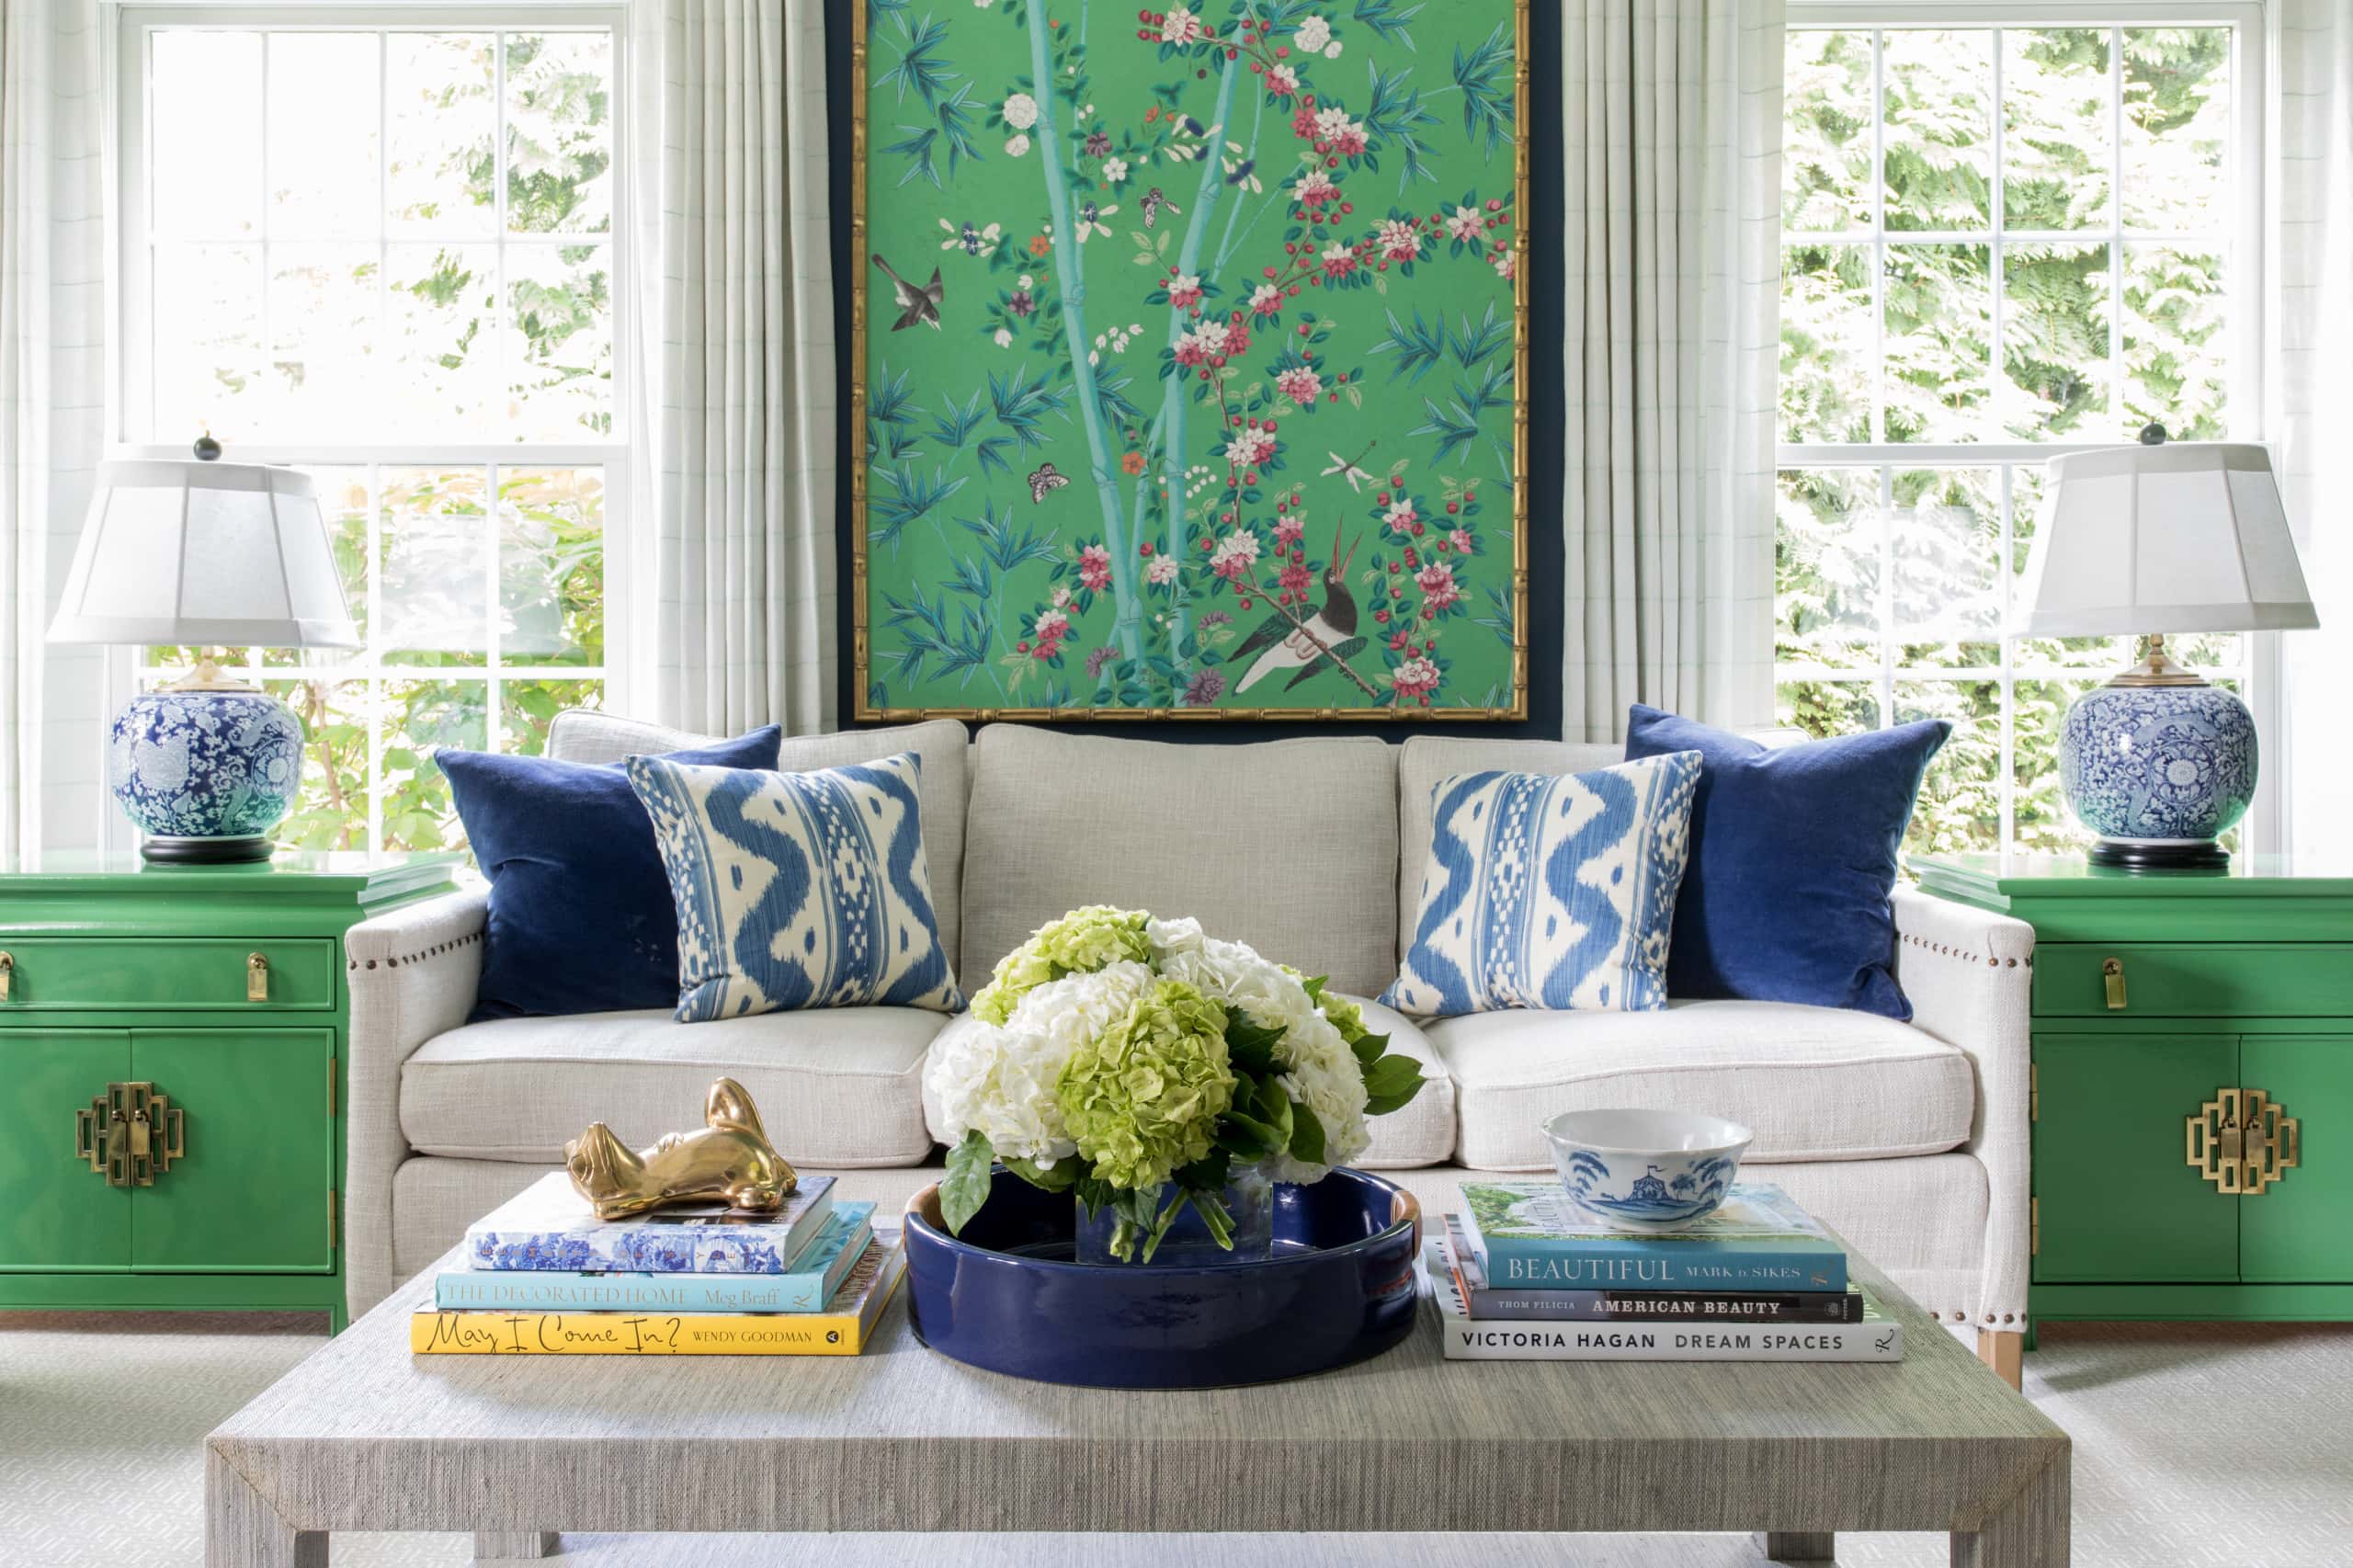 Colorful Elegance: The Chatham Project Home Tour